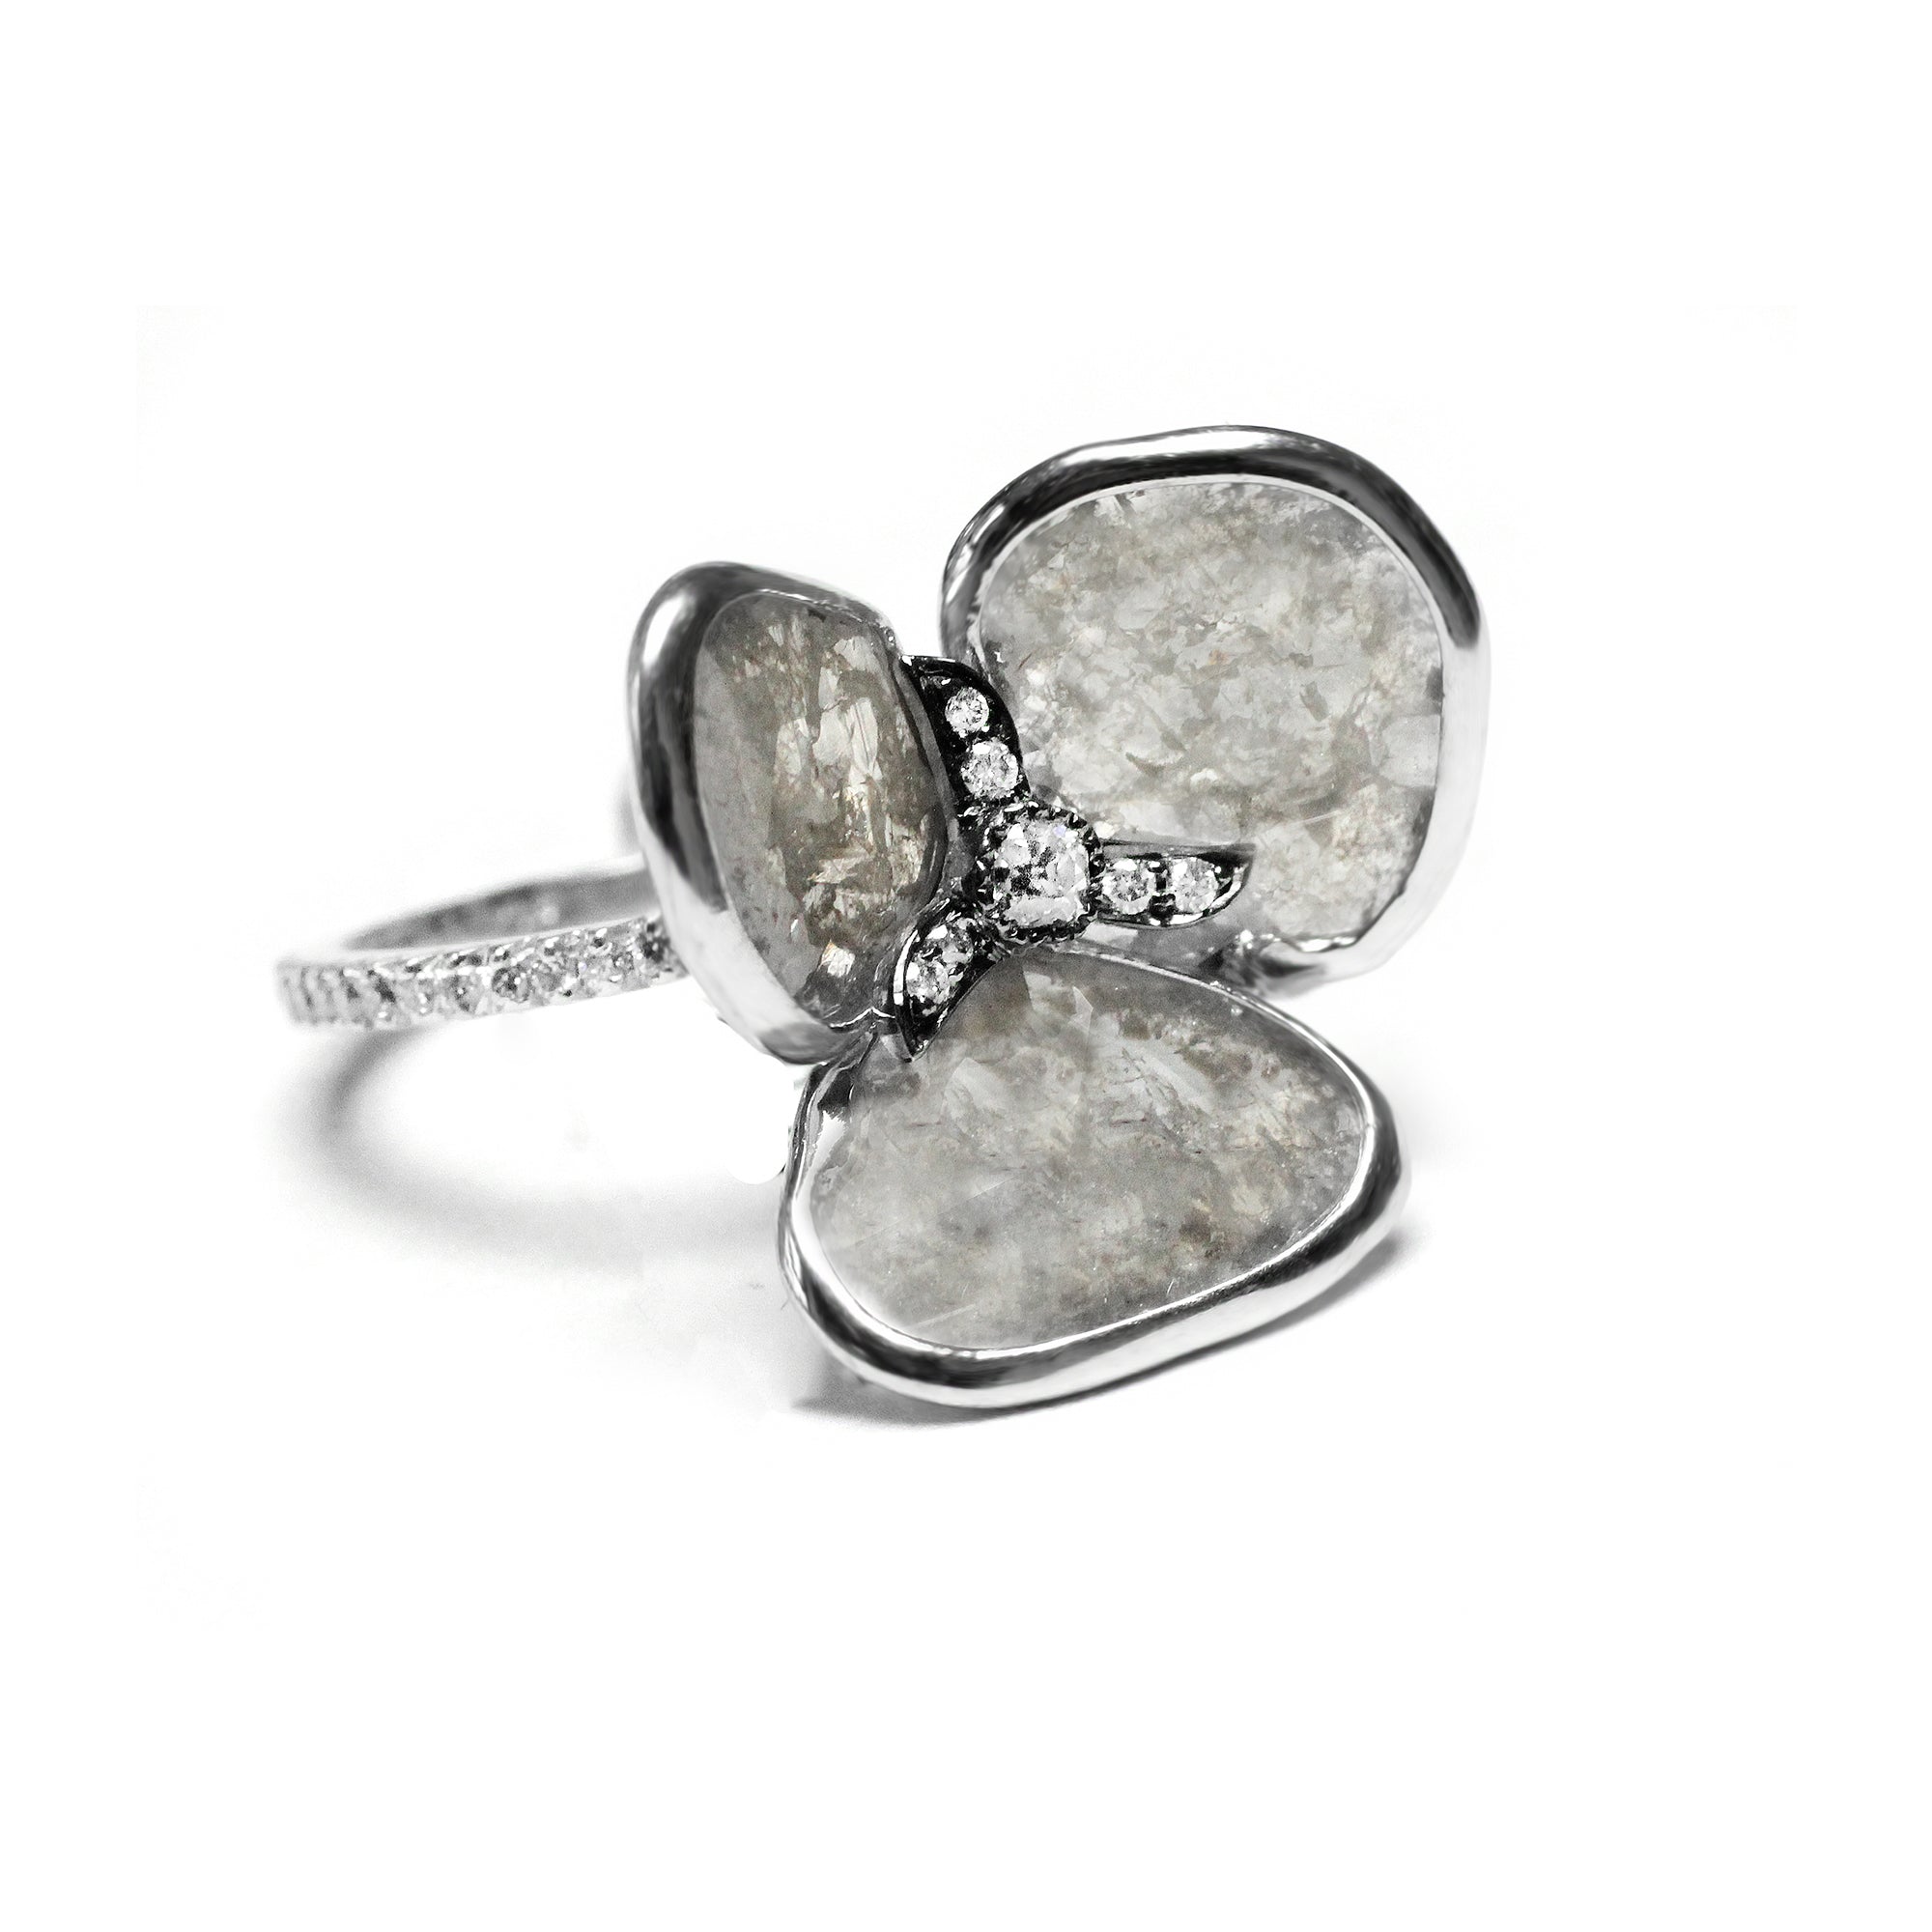 Grey Diamond Slice Flower Ring by Vivaan - White Gold - Talisman Collection Fine Jewelers